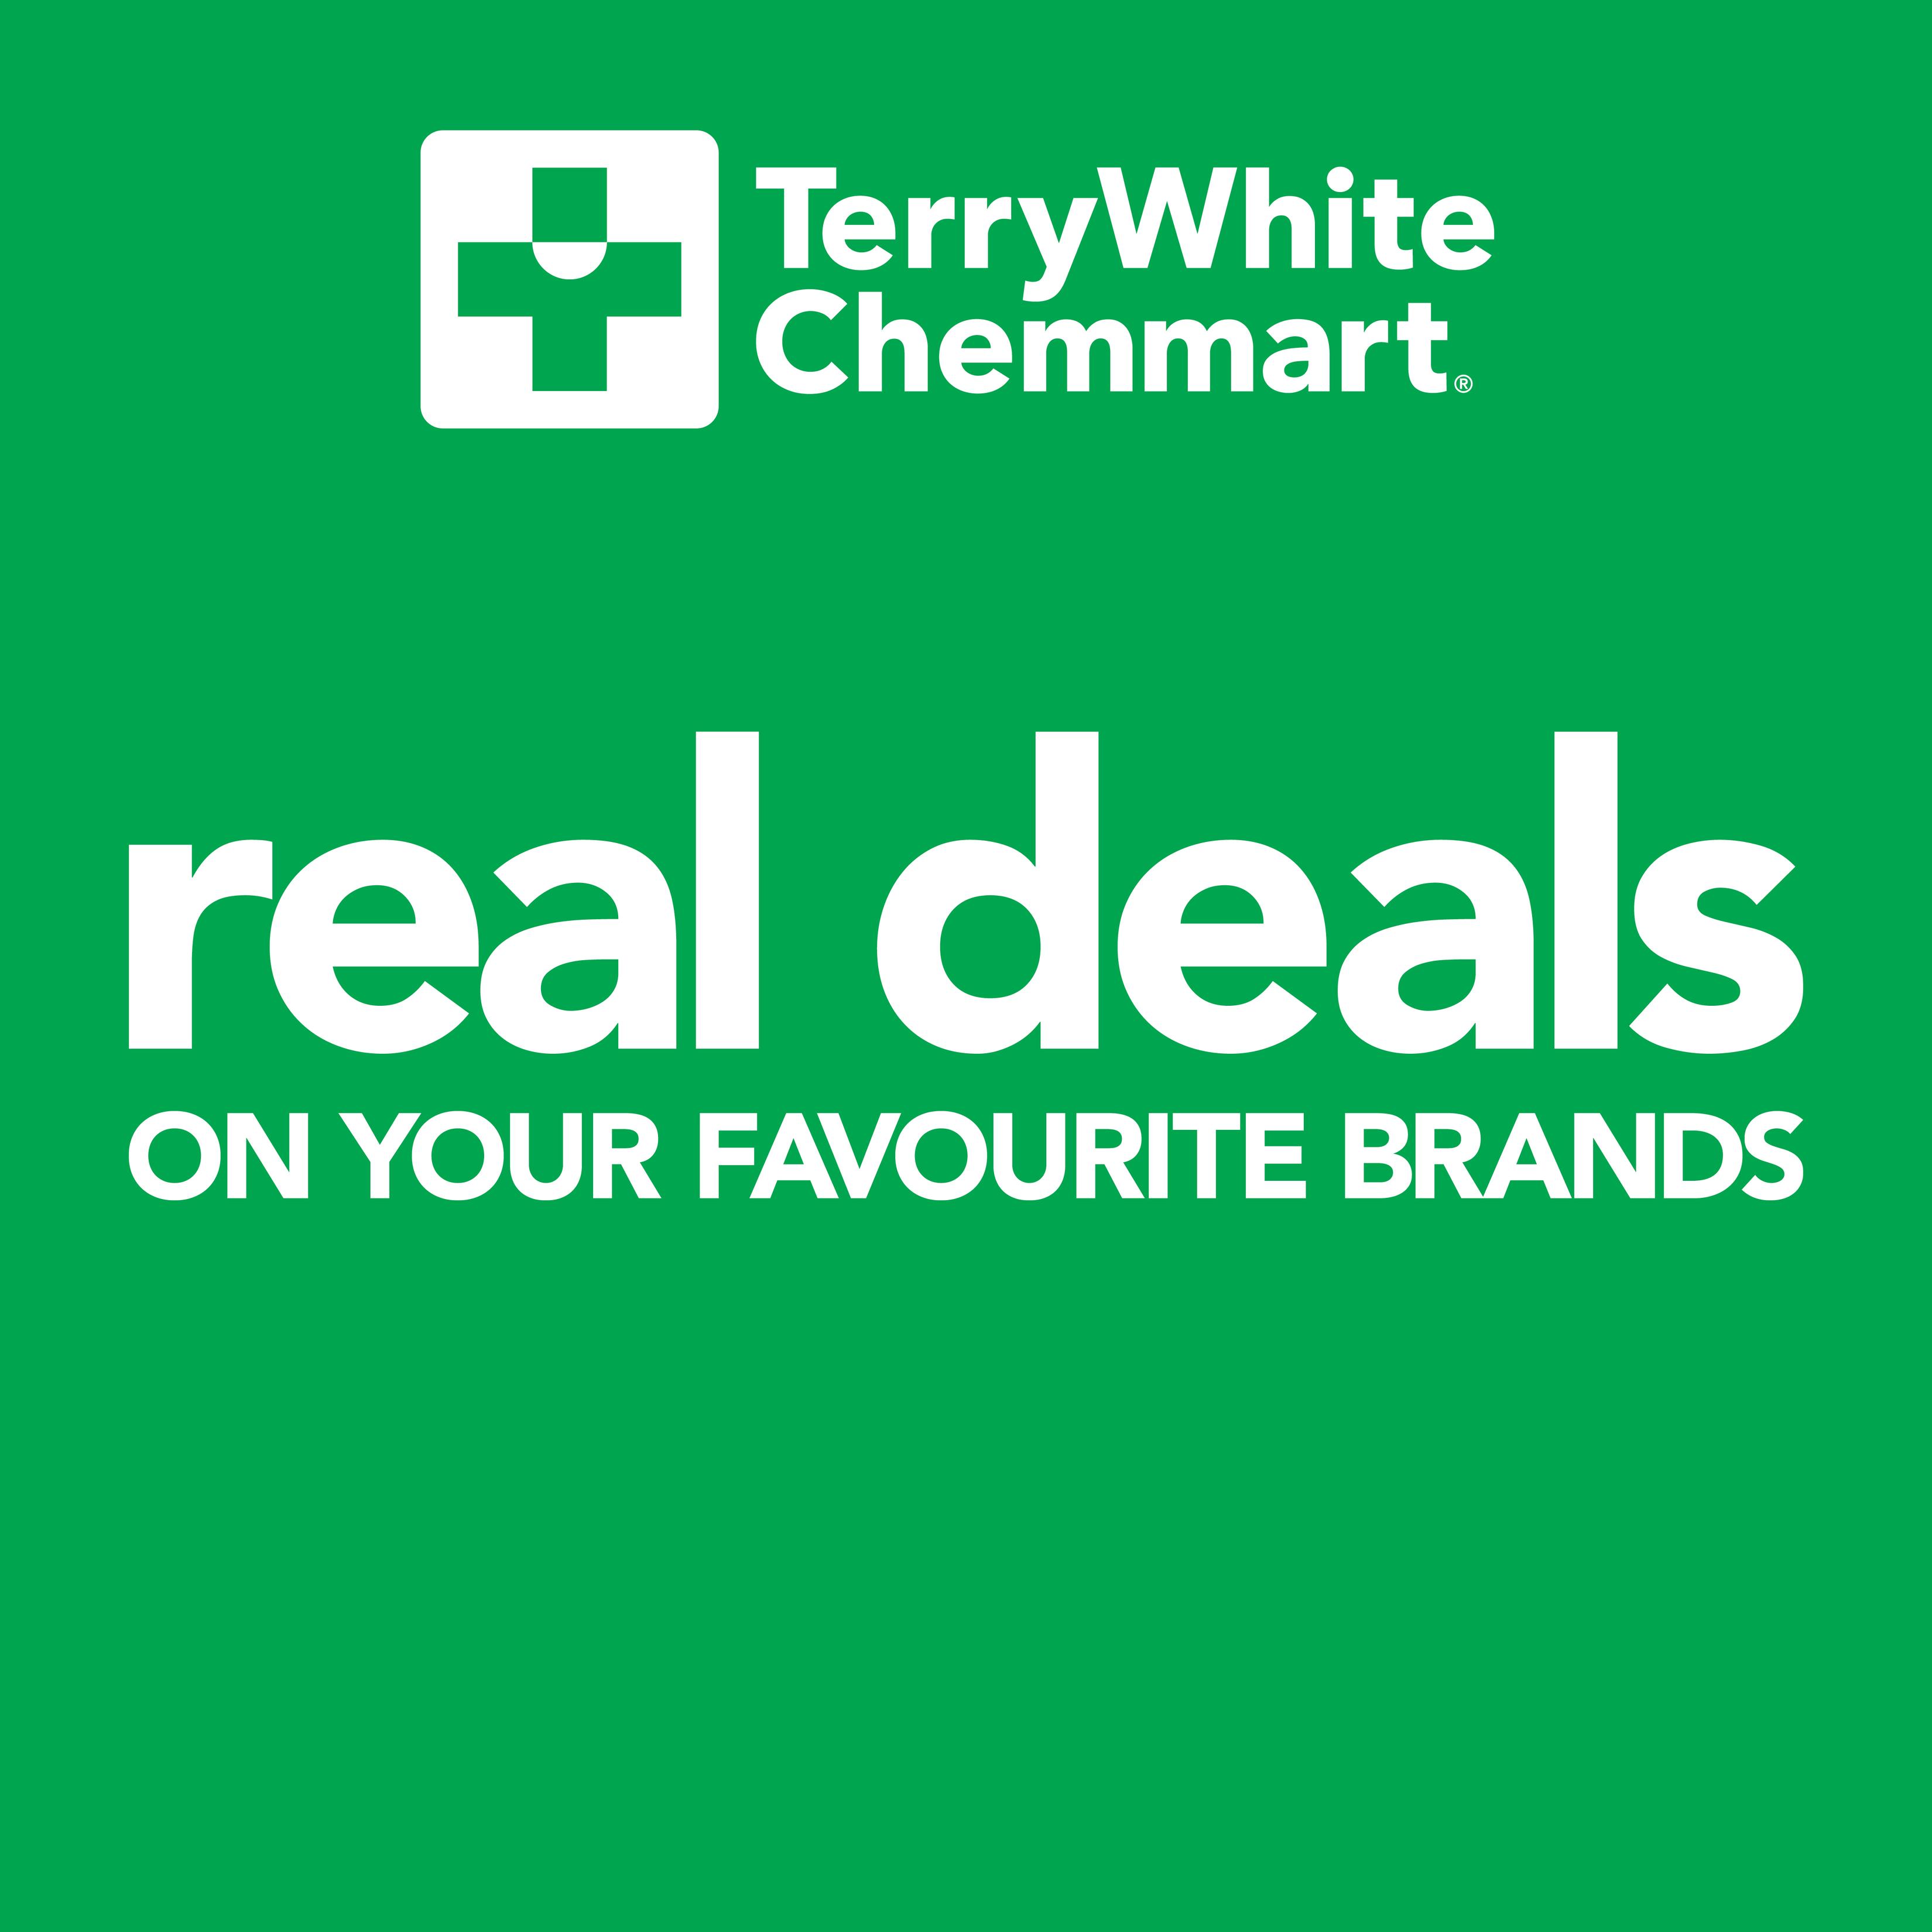 Real Deals  offers in TerryWhite Chemmart